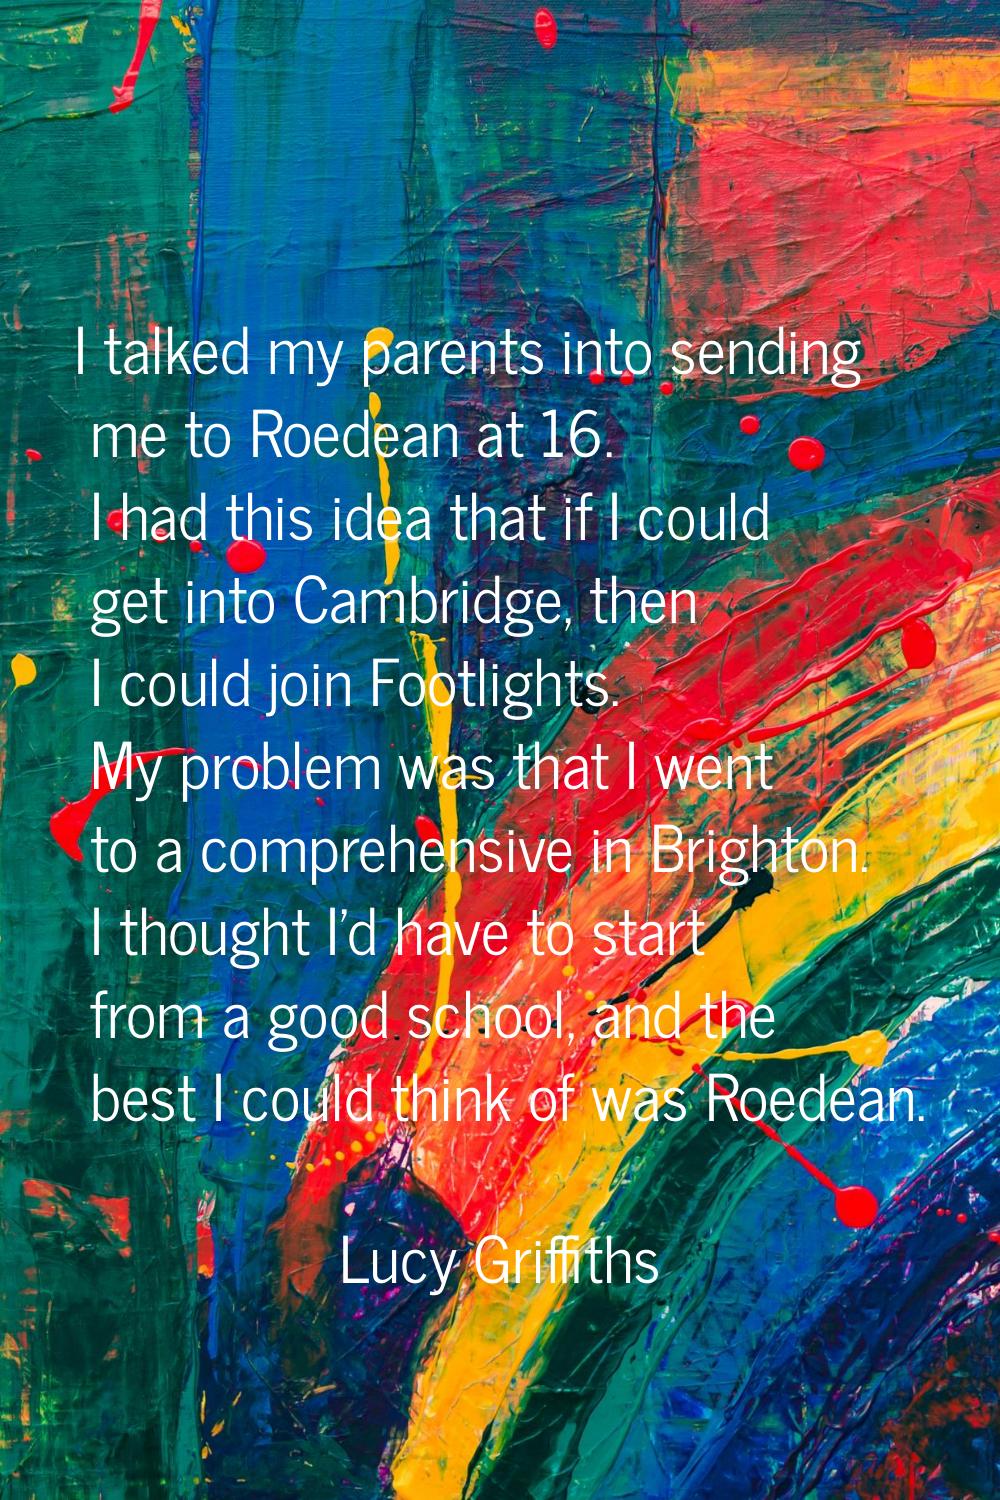 I talked my parents into sending me to Roedean at 16. I had this idea that if I could get into Camb